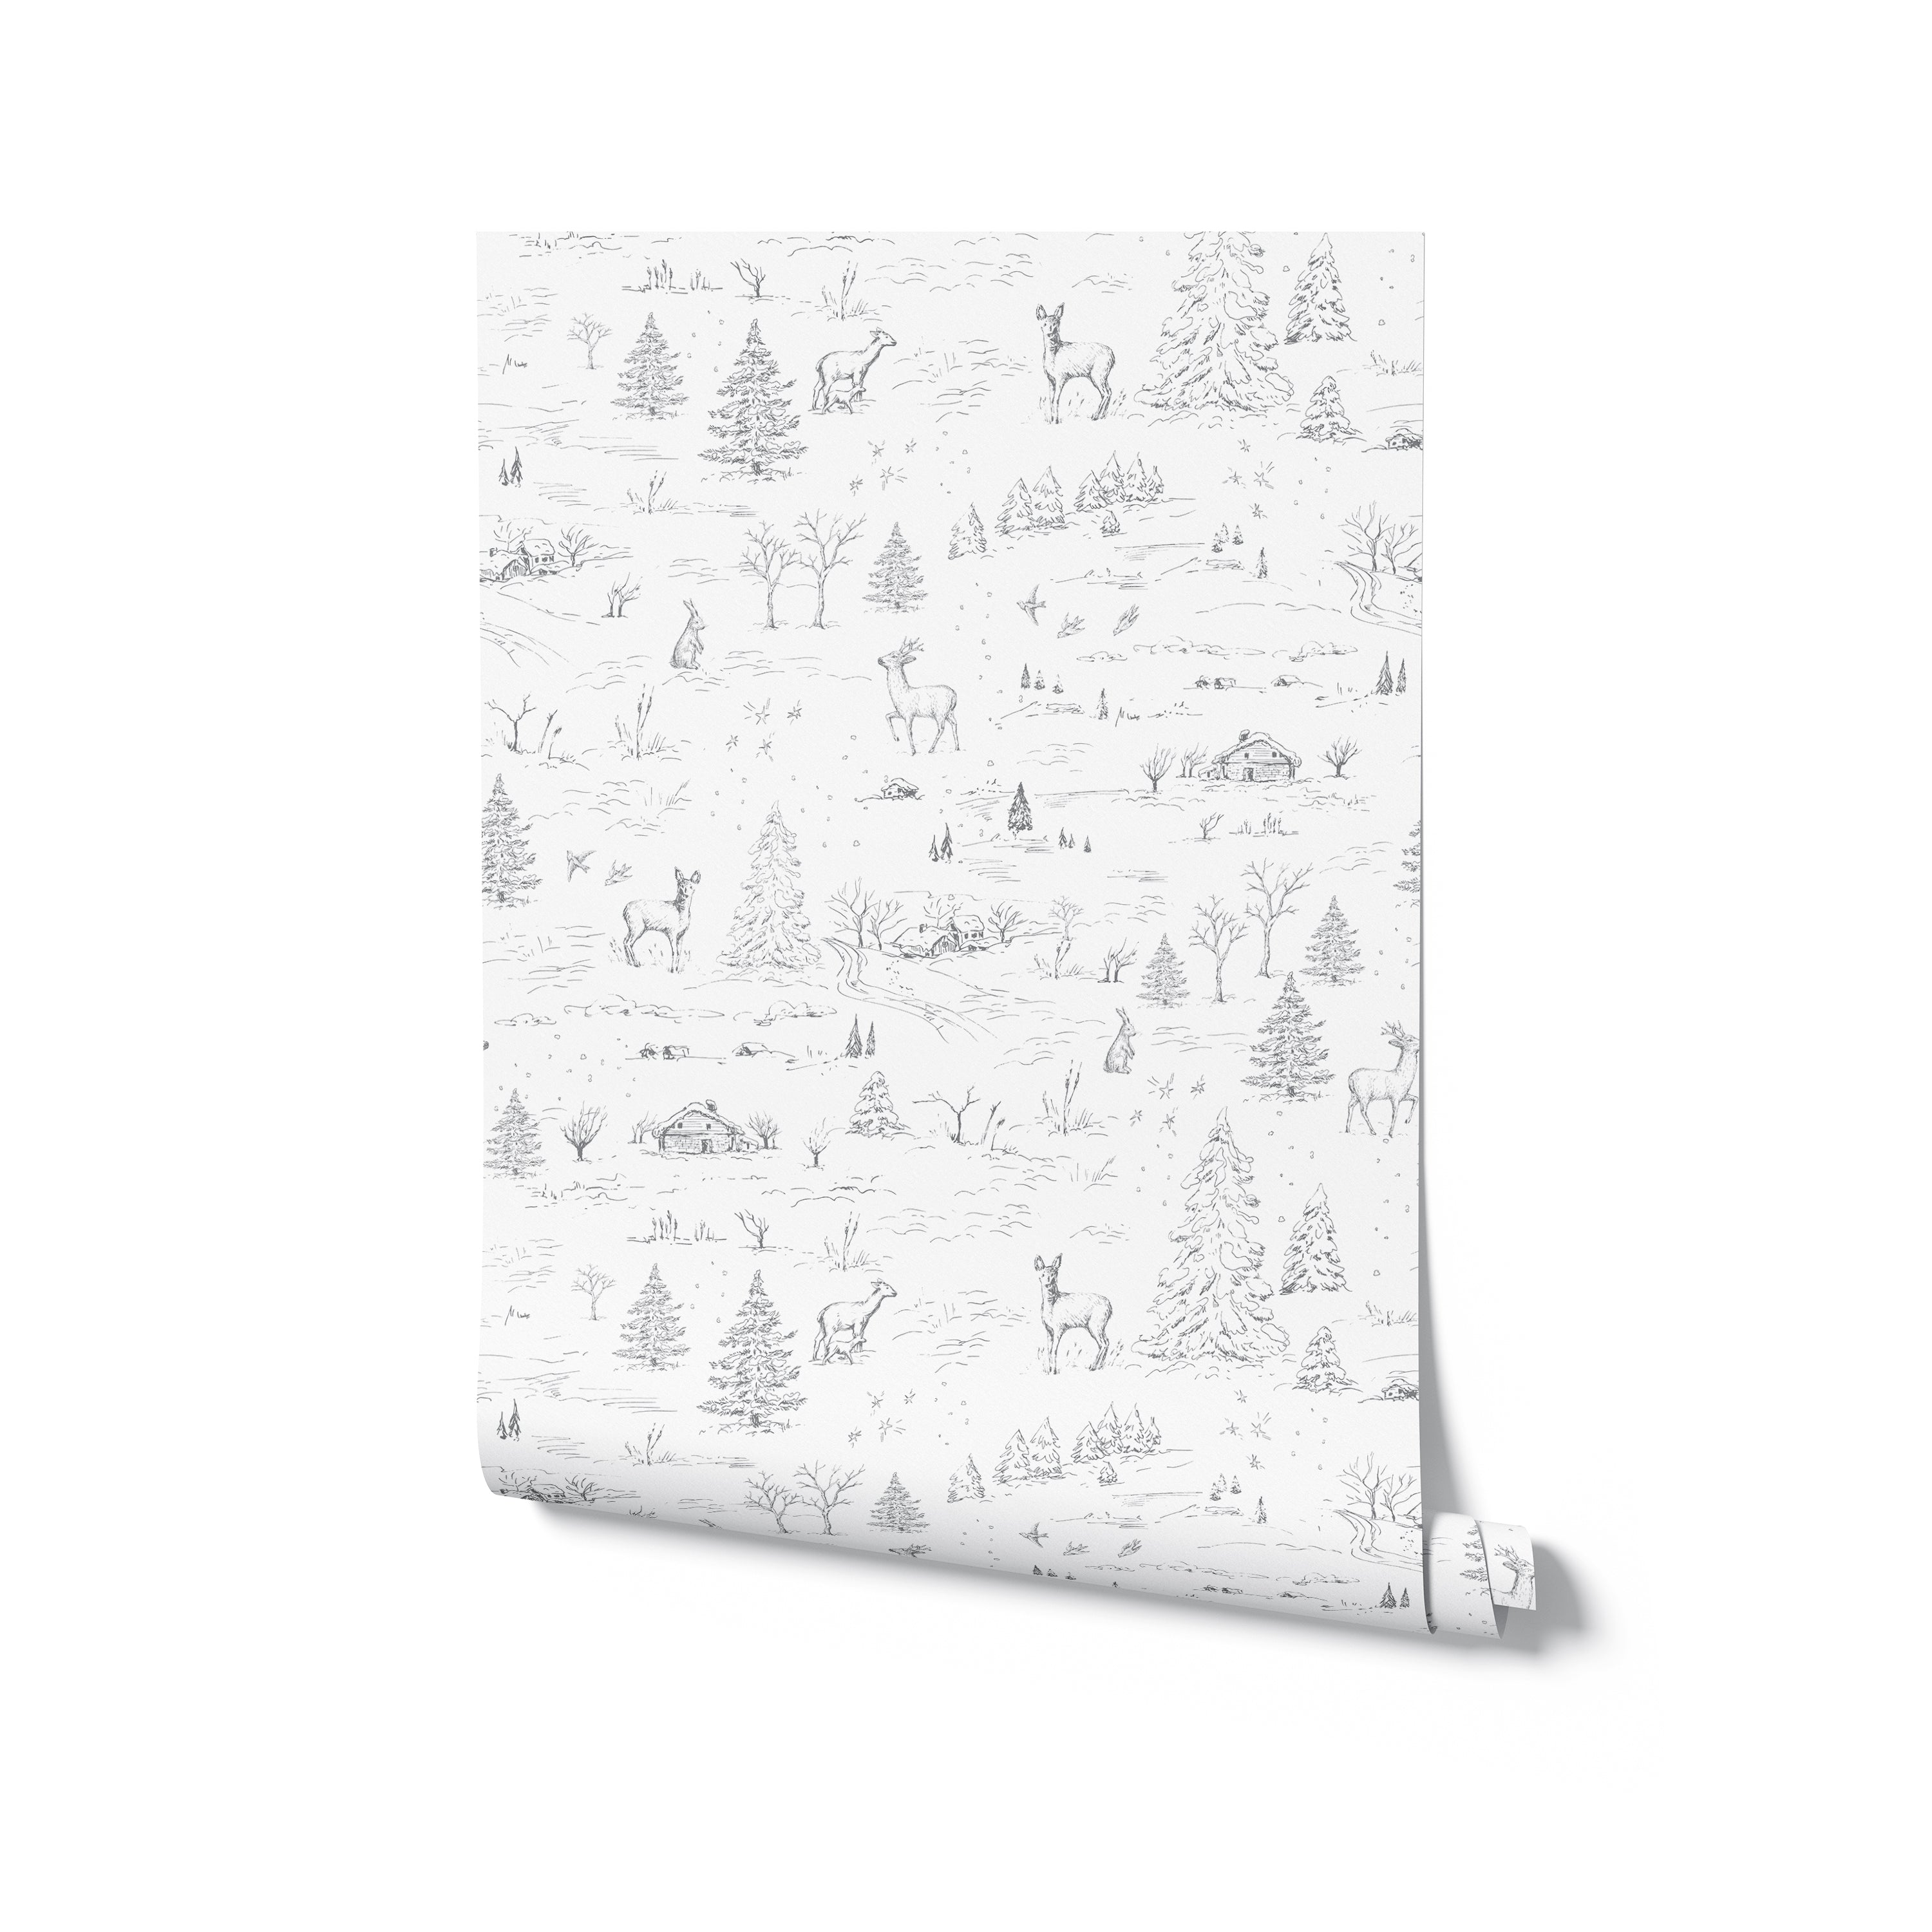 A rolled-up wallpaper with a sketch-like design featuring winter scenery and animals, primarily in white, hinting at a monochrome aesthetic for interior design